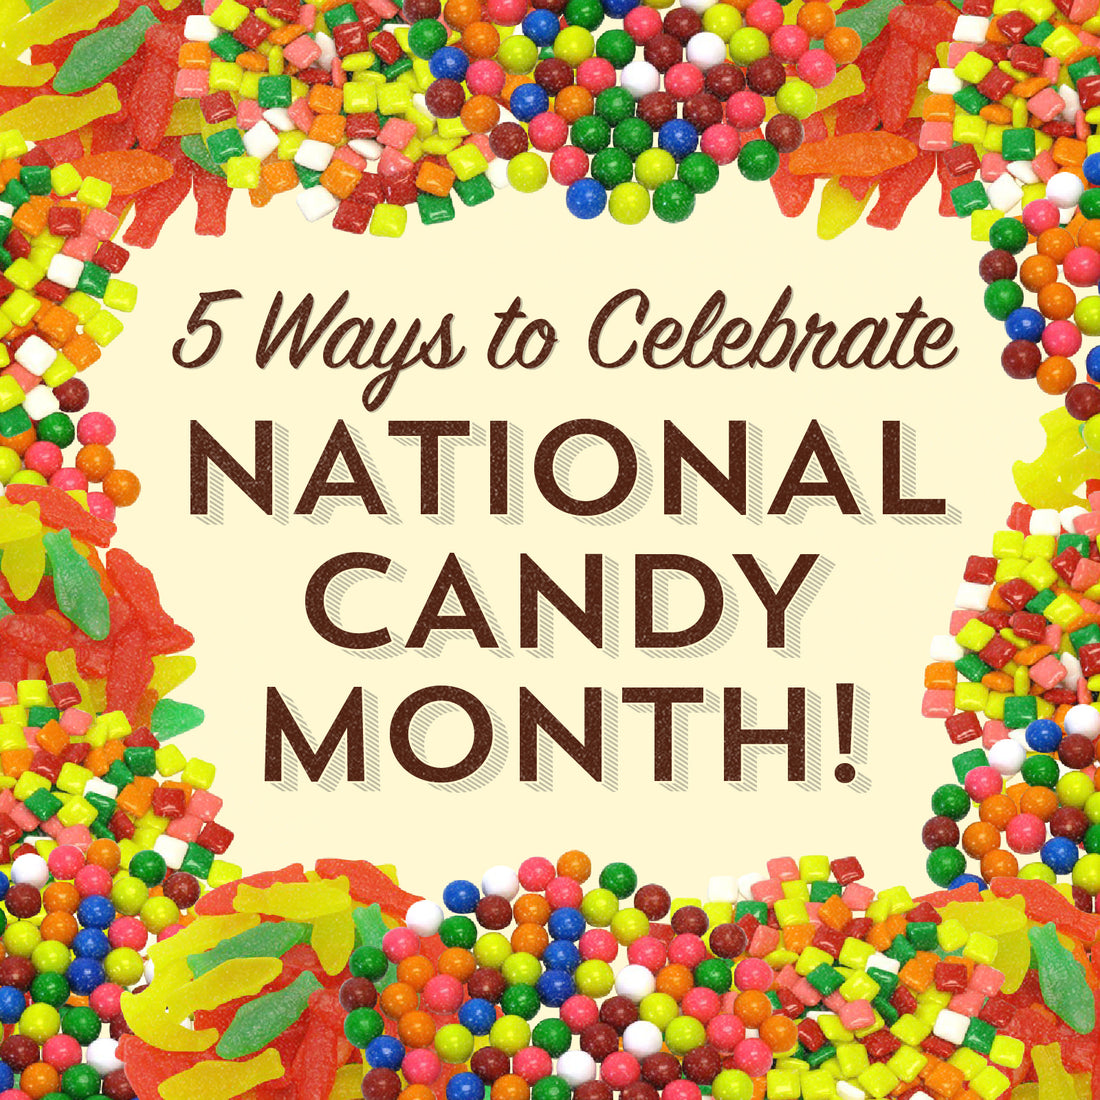 5 Ways To Celebrate National Candy Month